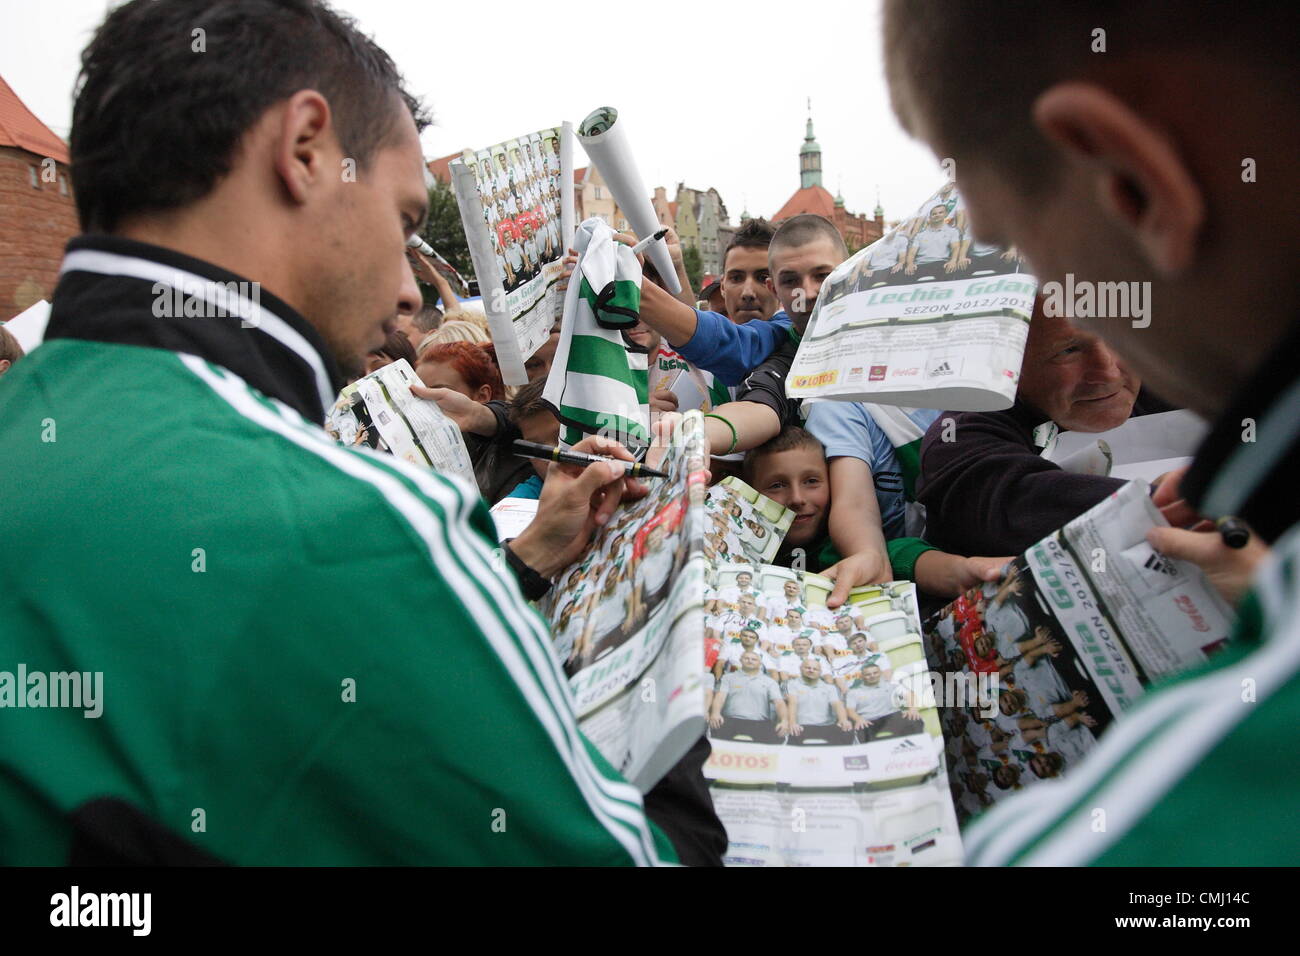 13th Aug 2012. Gdansk, Poland 13.08.2012 Players gives autograph to fans after the Lechia Gdansk Polish football extraleague team presentation before the 2012/2013 seazon. Stock Photo